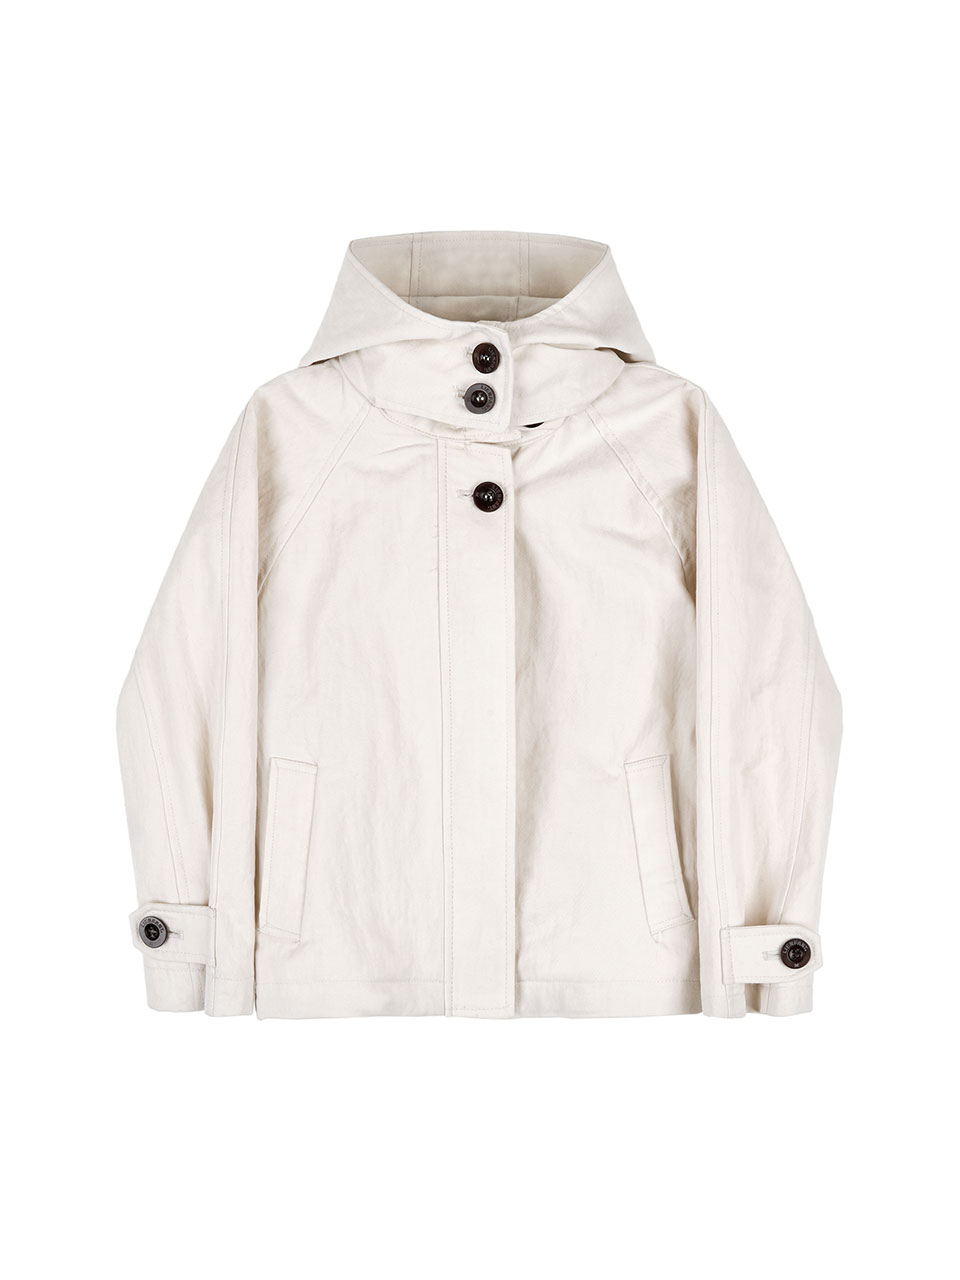 Short raincoat trench to cover up spring rain - cream